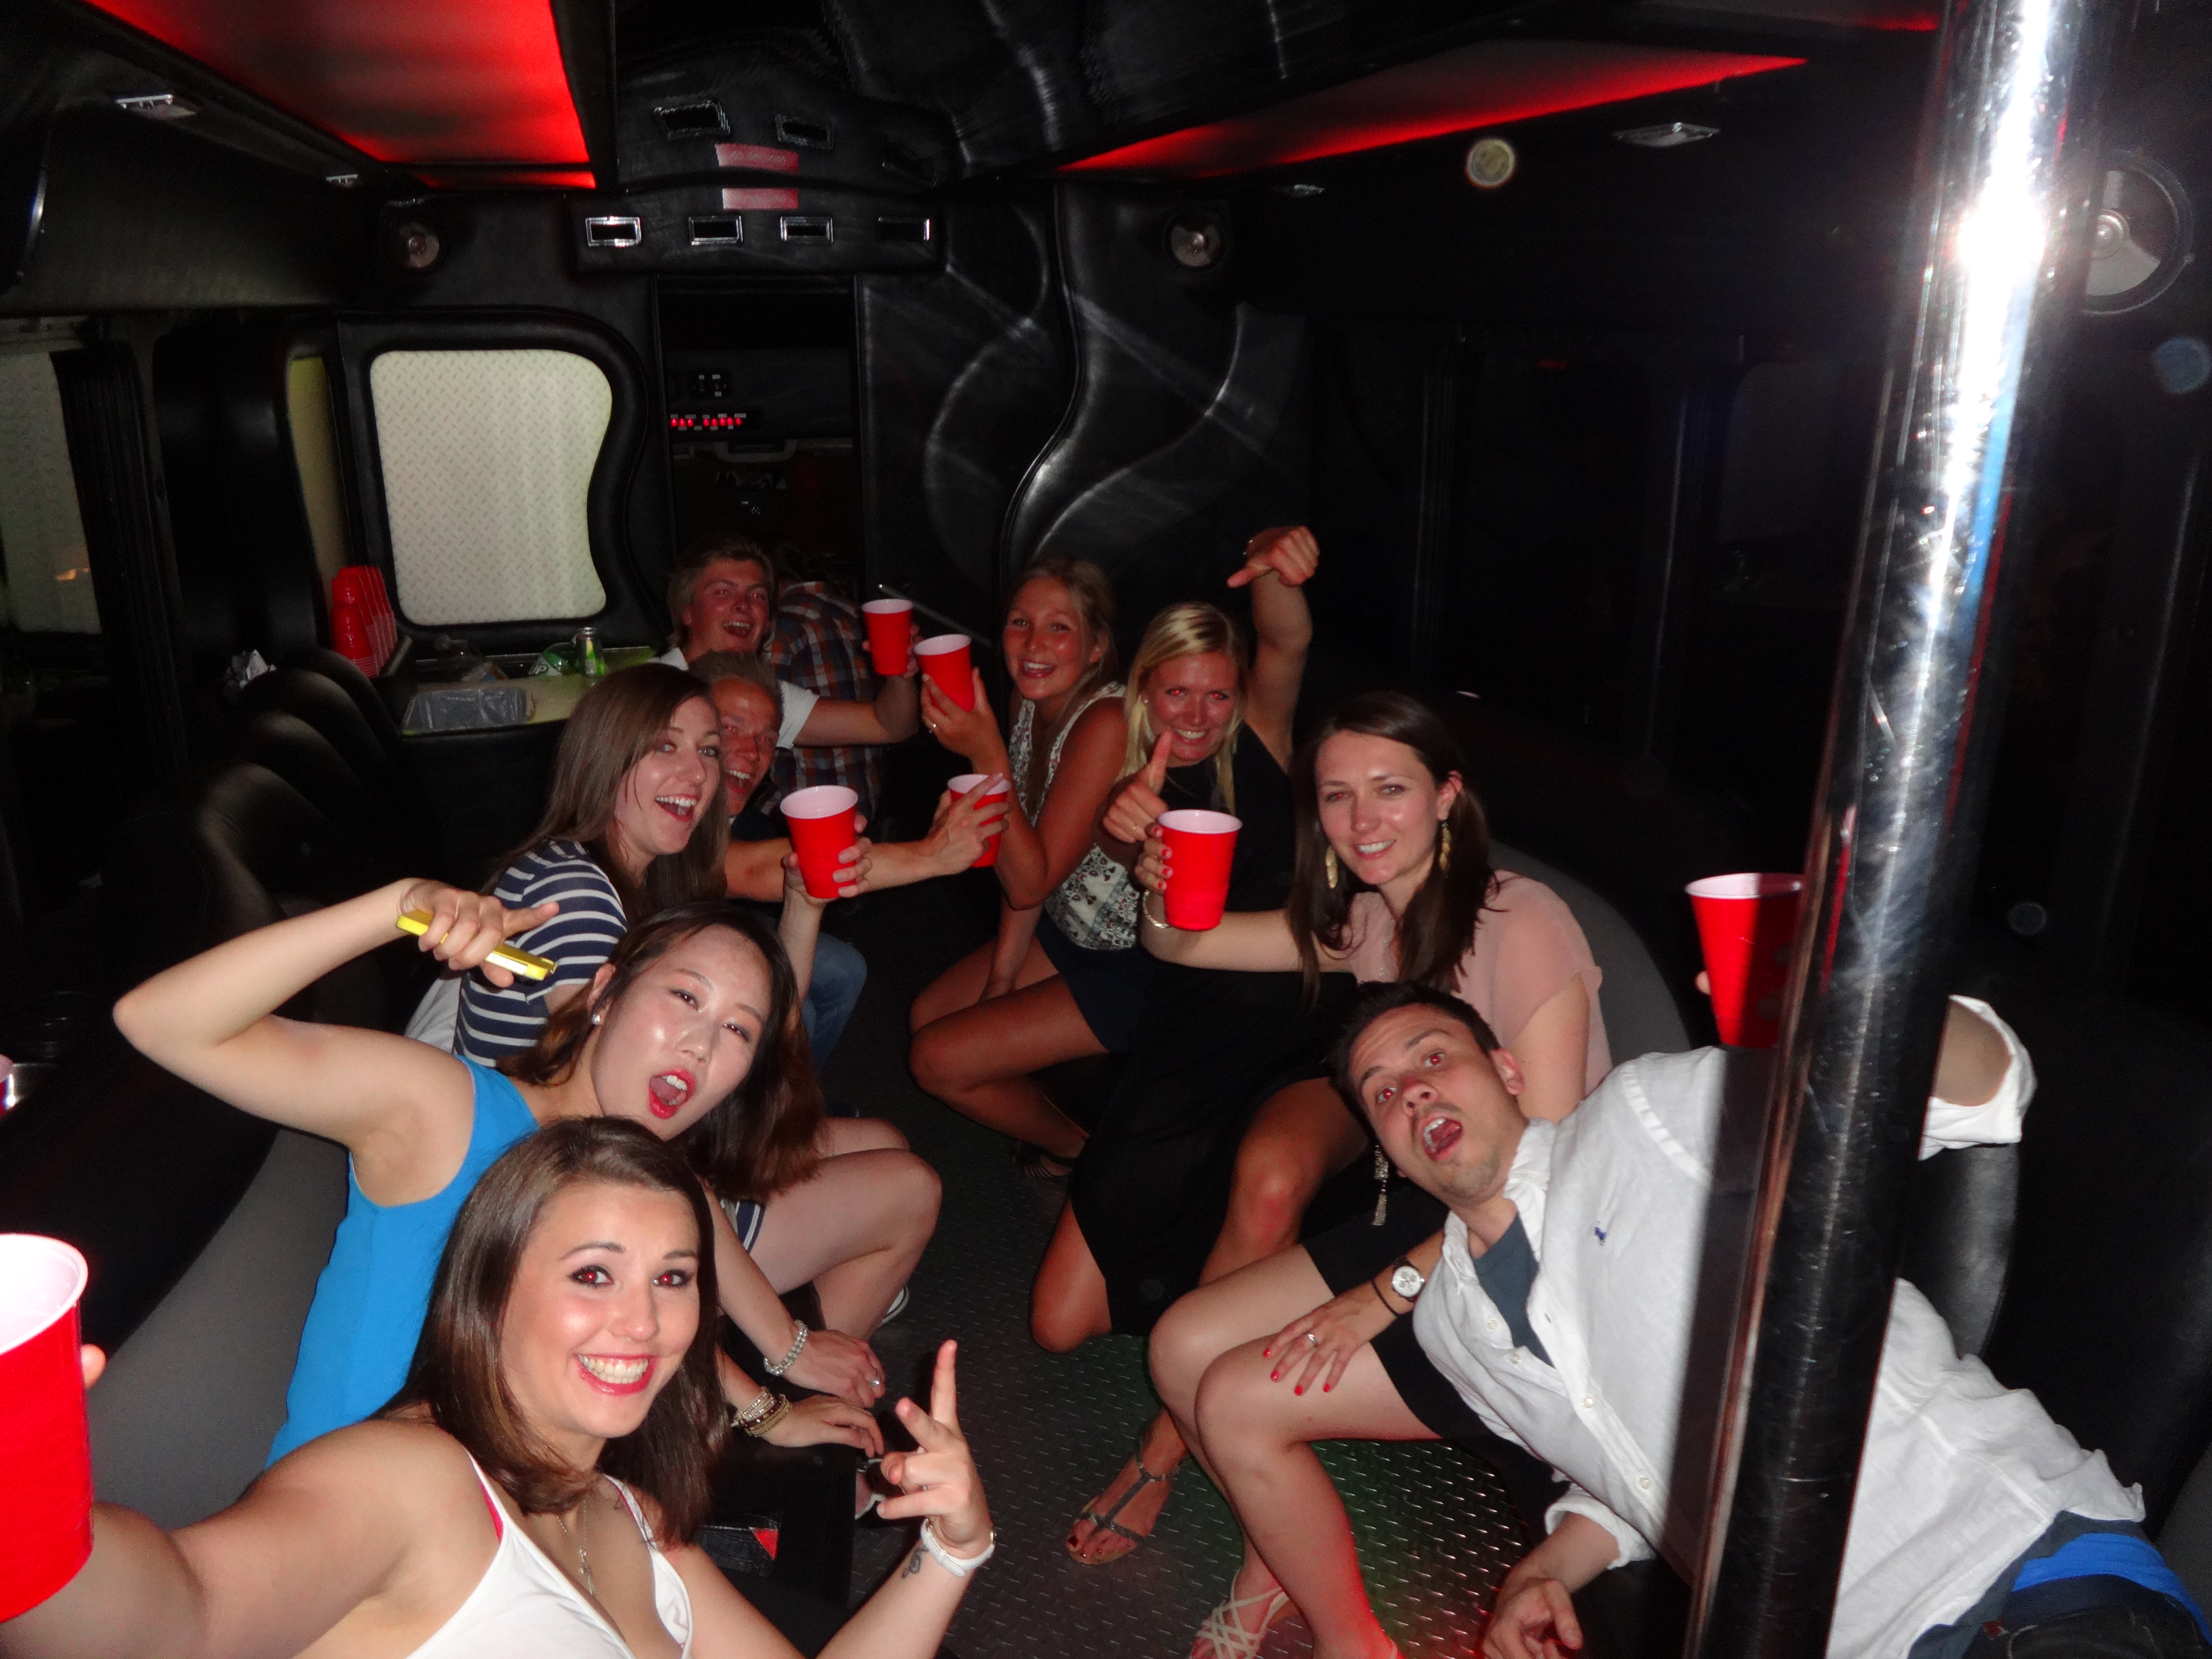 Riding in the Party Bus in Vegas